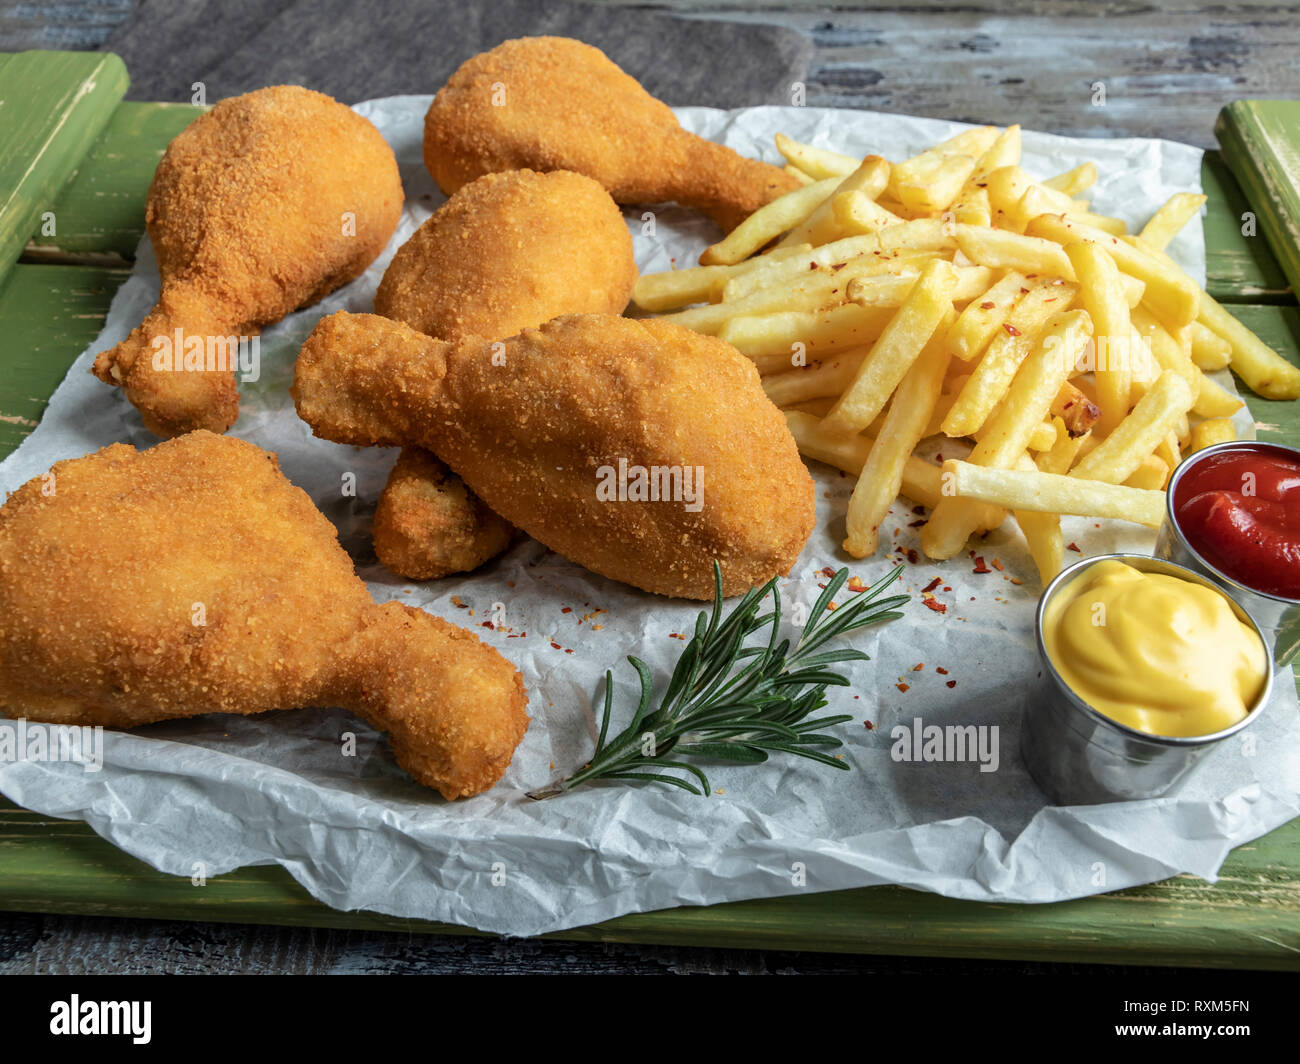 crispy fried chicken legs breaded golden color, french fries Stock Photo